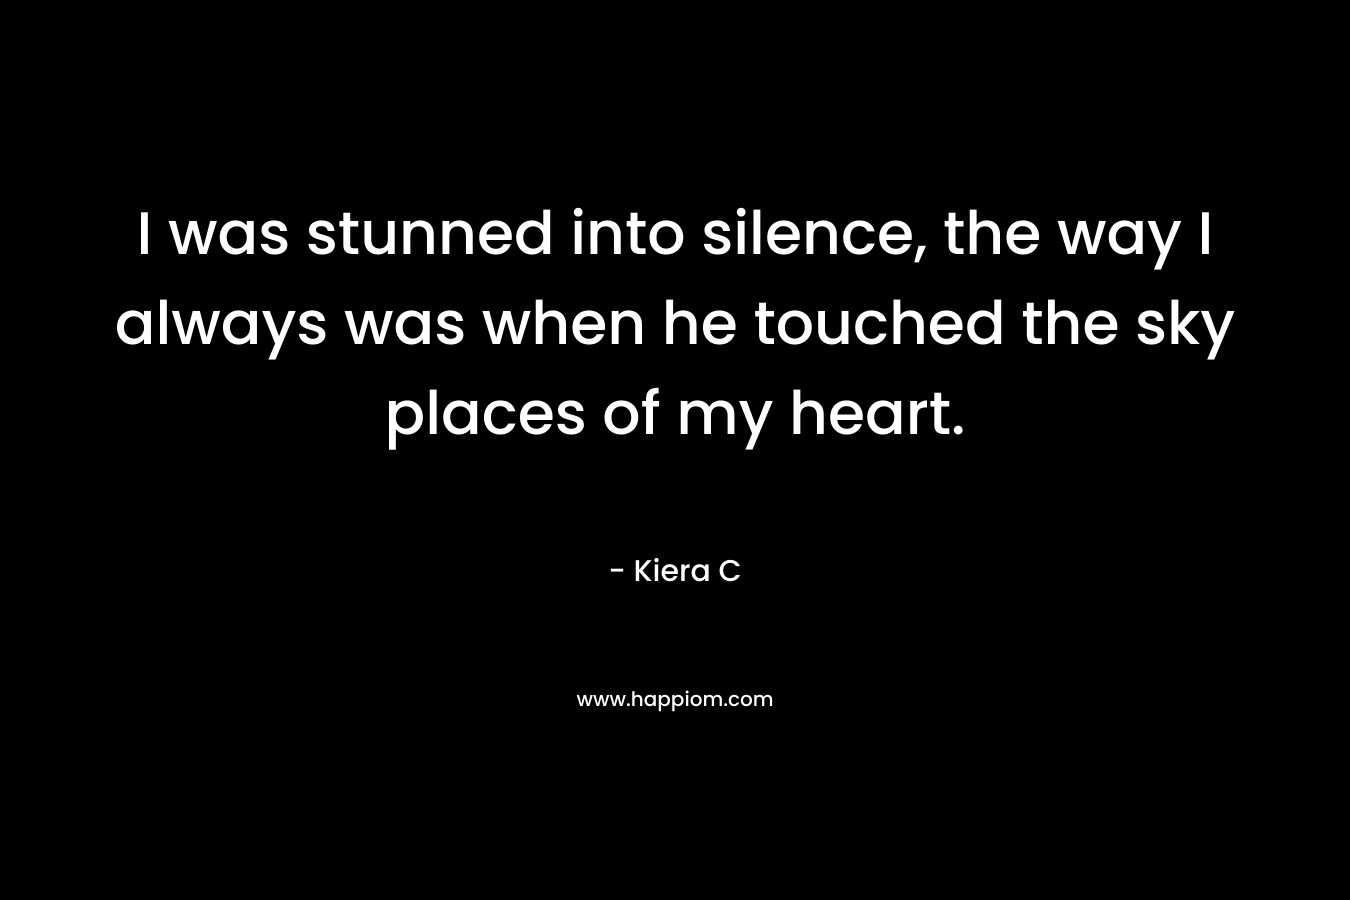 I was stunned into silence, the way I always was when he touched the sky places of my heart. – Kiera C